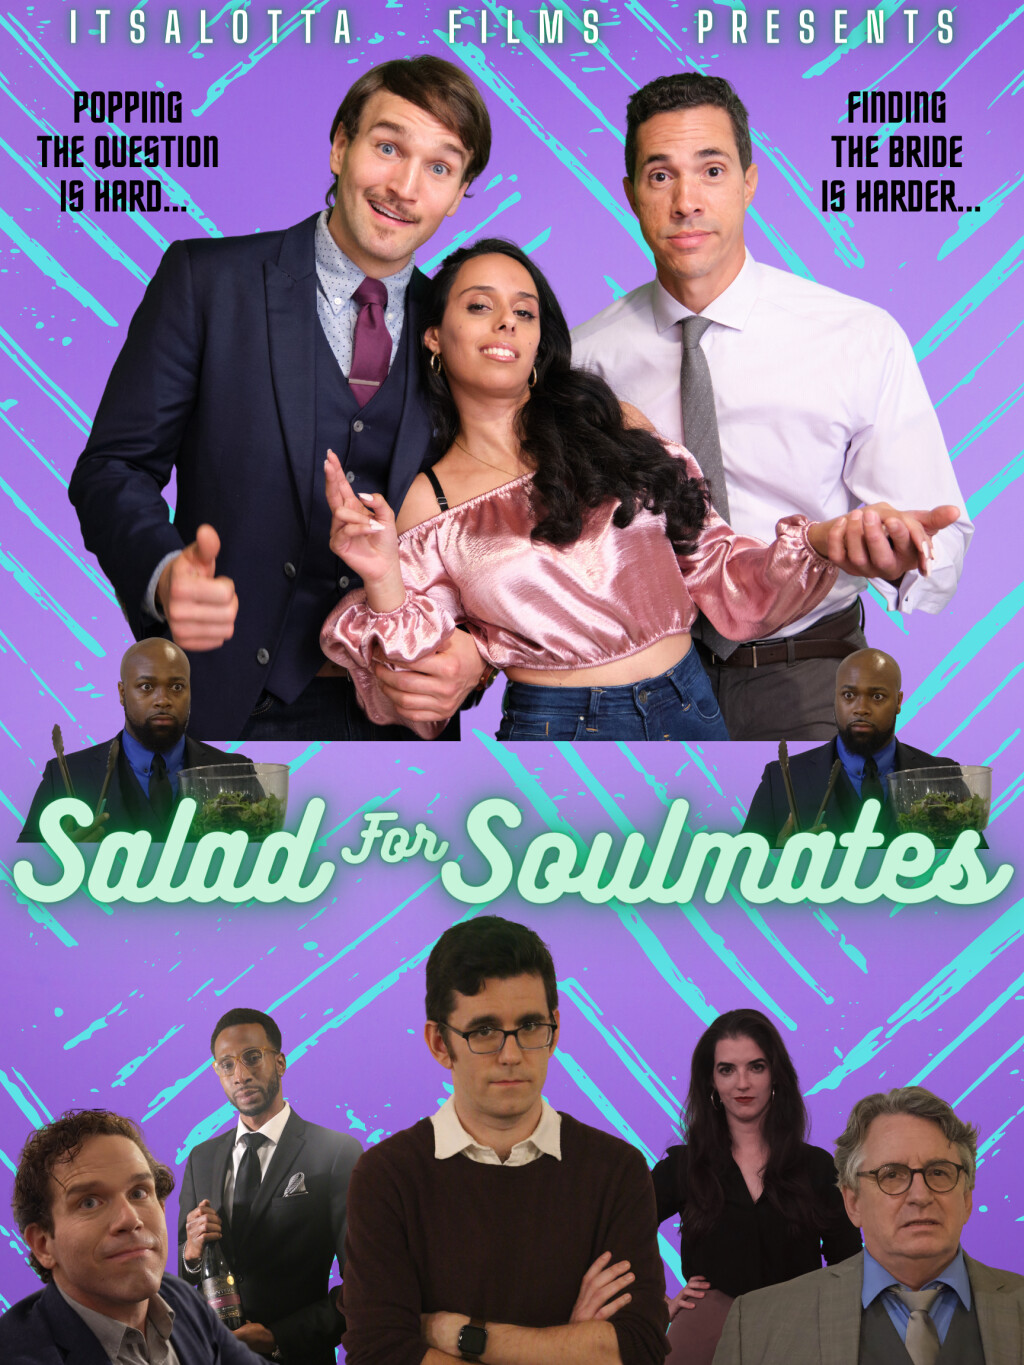 Filmposter for Salads for Soulmates